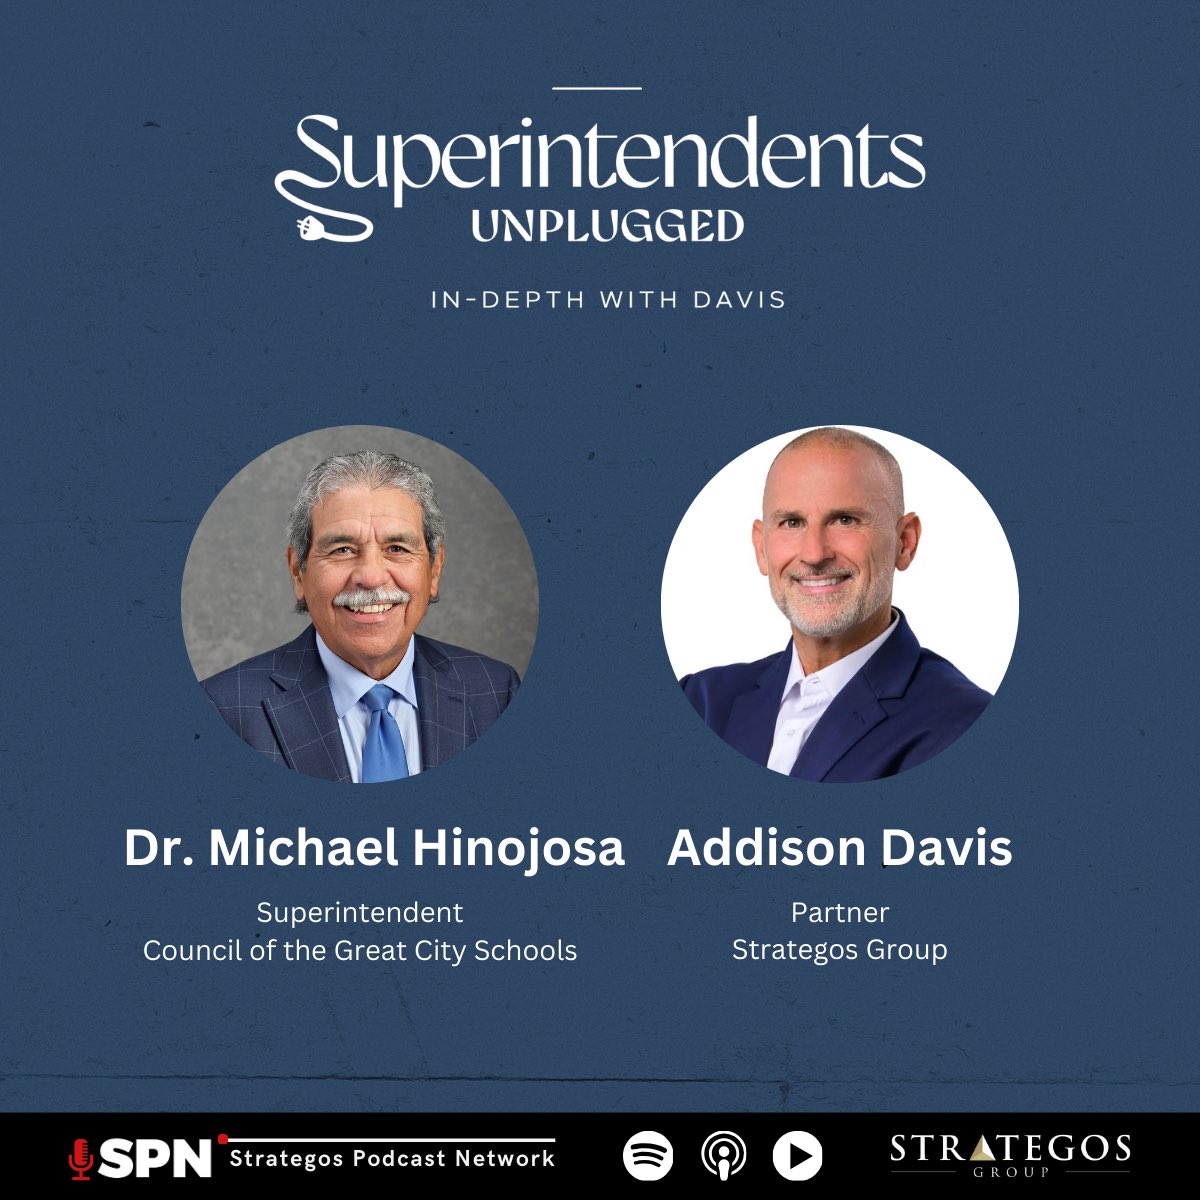 🎙️ Don't miss my latest #SuperIntendentsUnplugged #podcast episode Dr. @Michael Hinojosa!   🎧 Listen here: player.captivate.fm/episode/f2dc35…   I enjoyed speaking with Dr. Hinojosa, former #Dallas Independent School District #superintendent, 27 years of experience with such great insight.